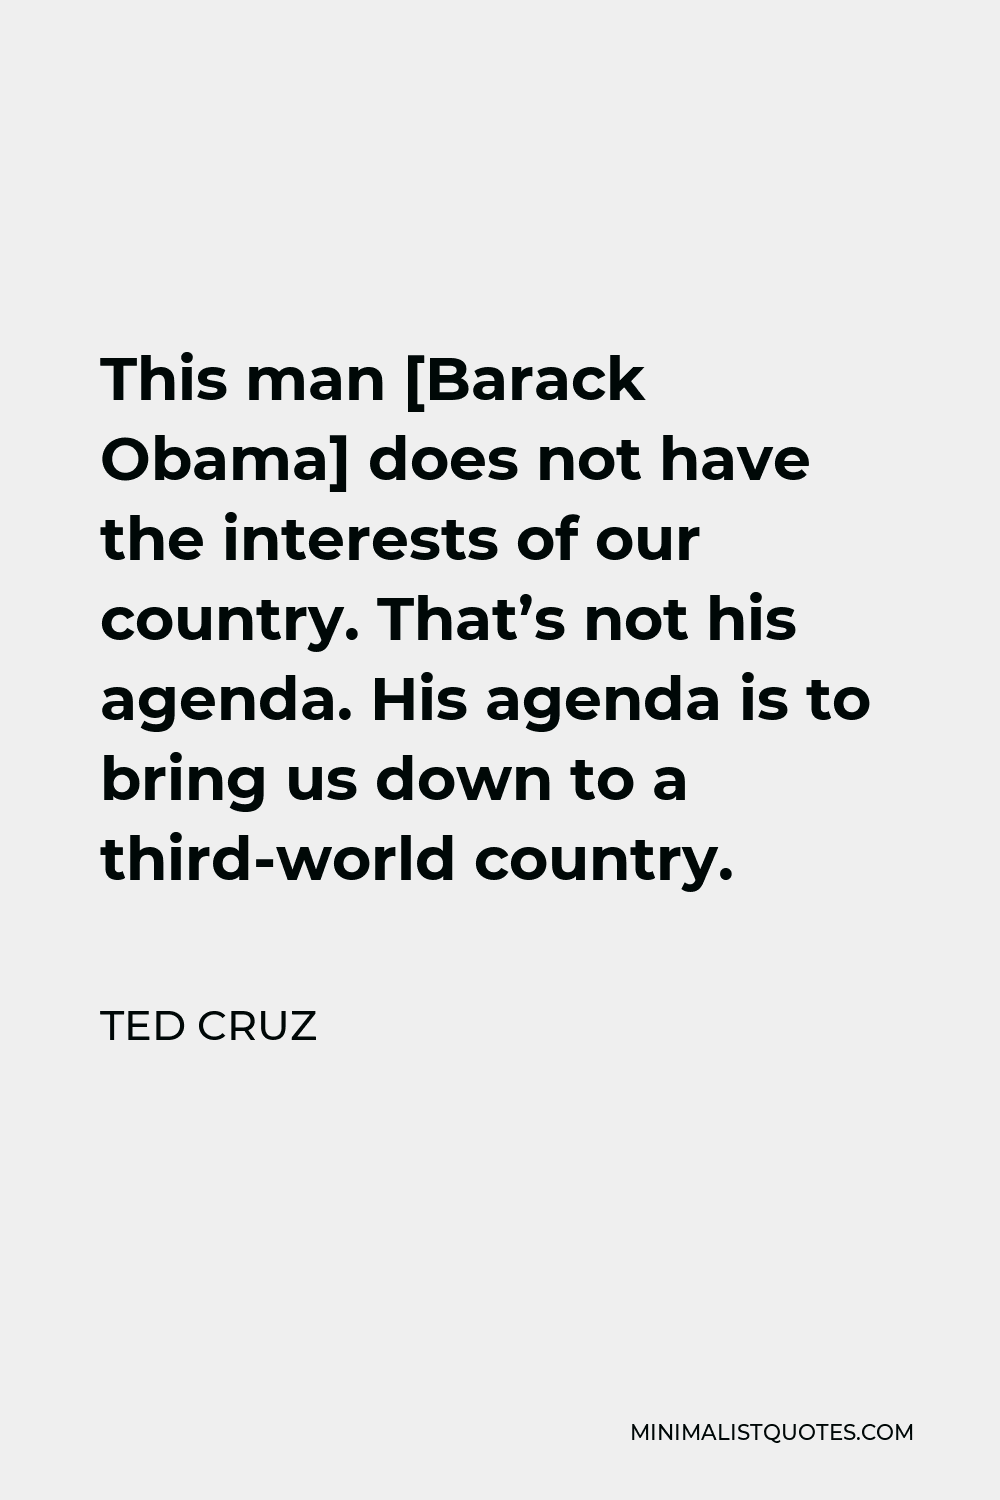 Ted Cruz Quote - This man [Barack Obama] does not have the interests of our country. That’s not his agenda. His agenda is to bring us down to a third-world country.